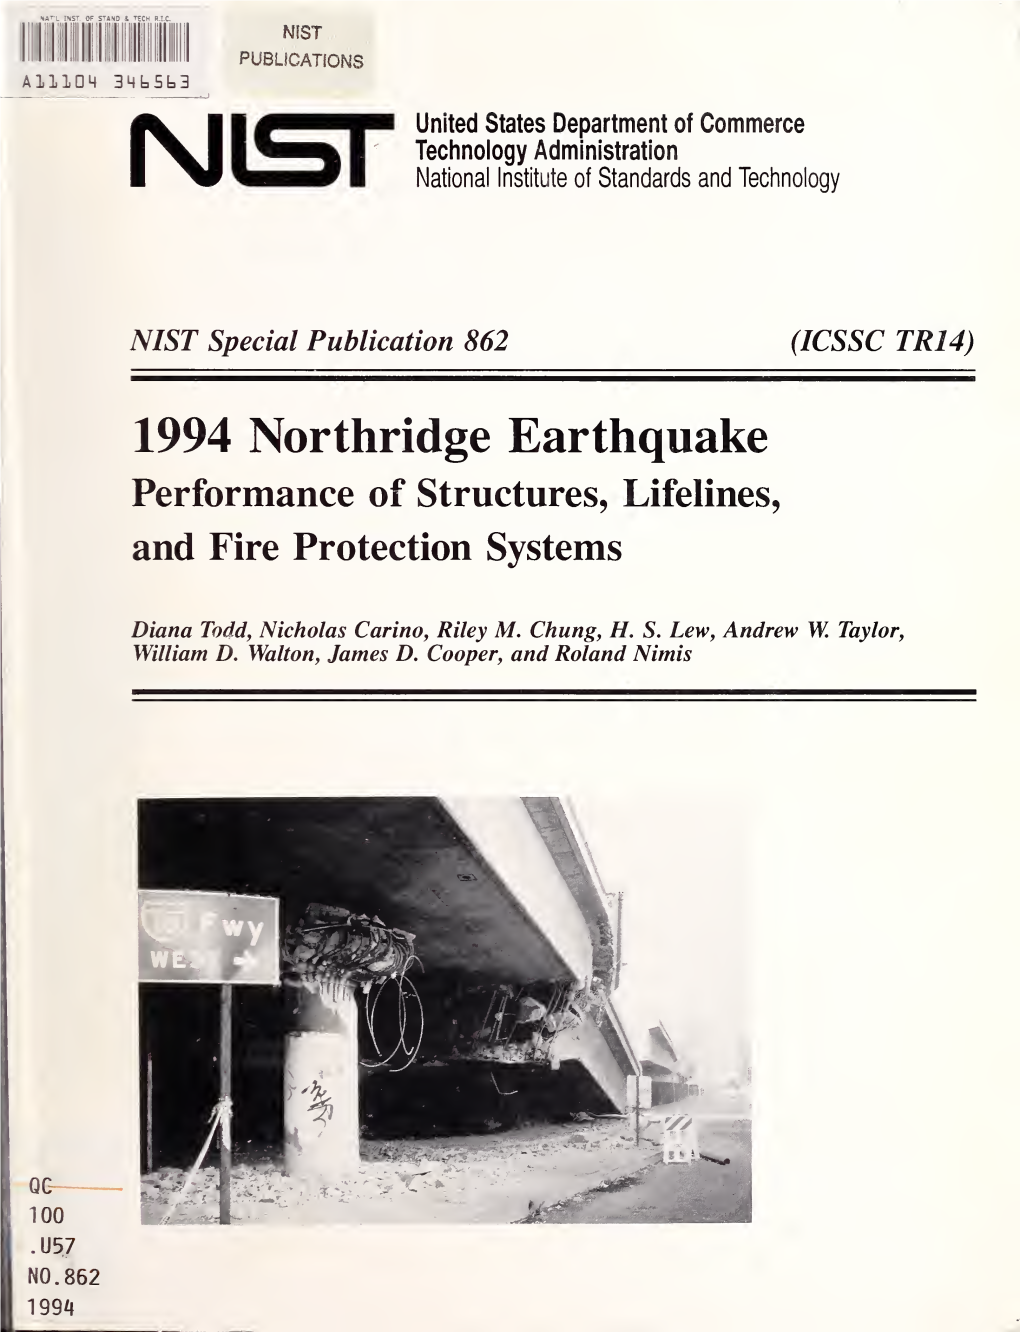 1994 Northridge Earthquake Performance of Structures, Lifelines, and Fire Protection Systems